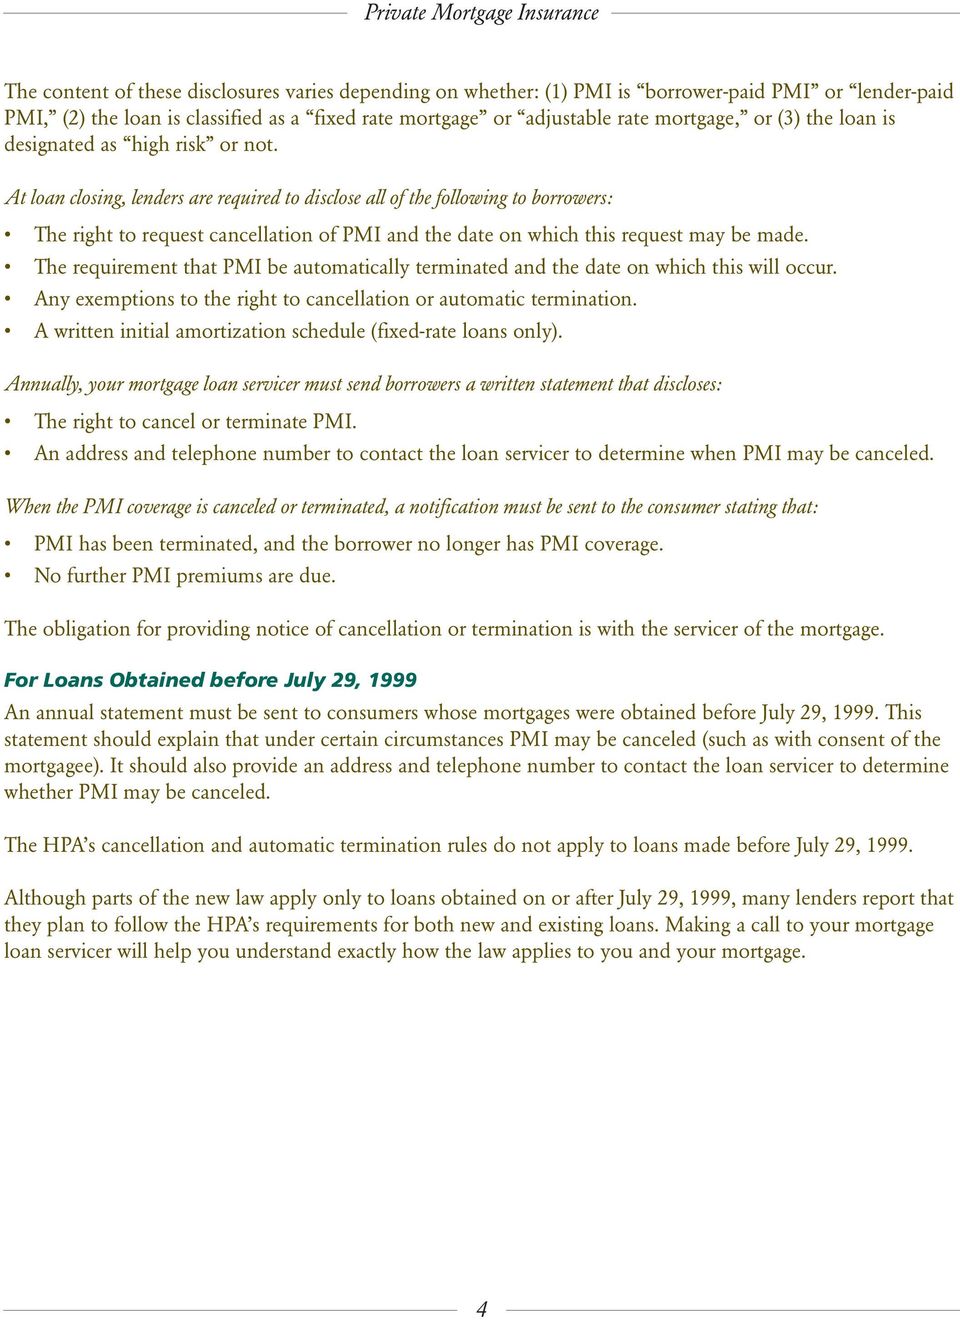 At loan closing, lenders are required to disclose all of the following to borrowers: The right to request cancellation of PMI and the date on which this request may be made.